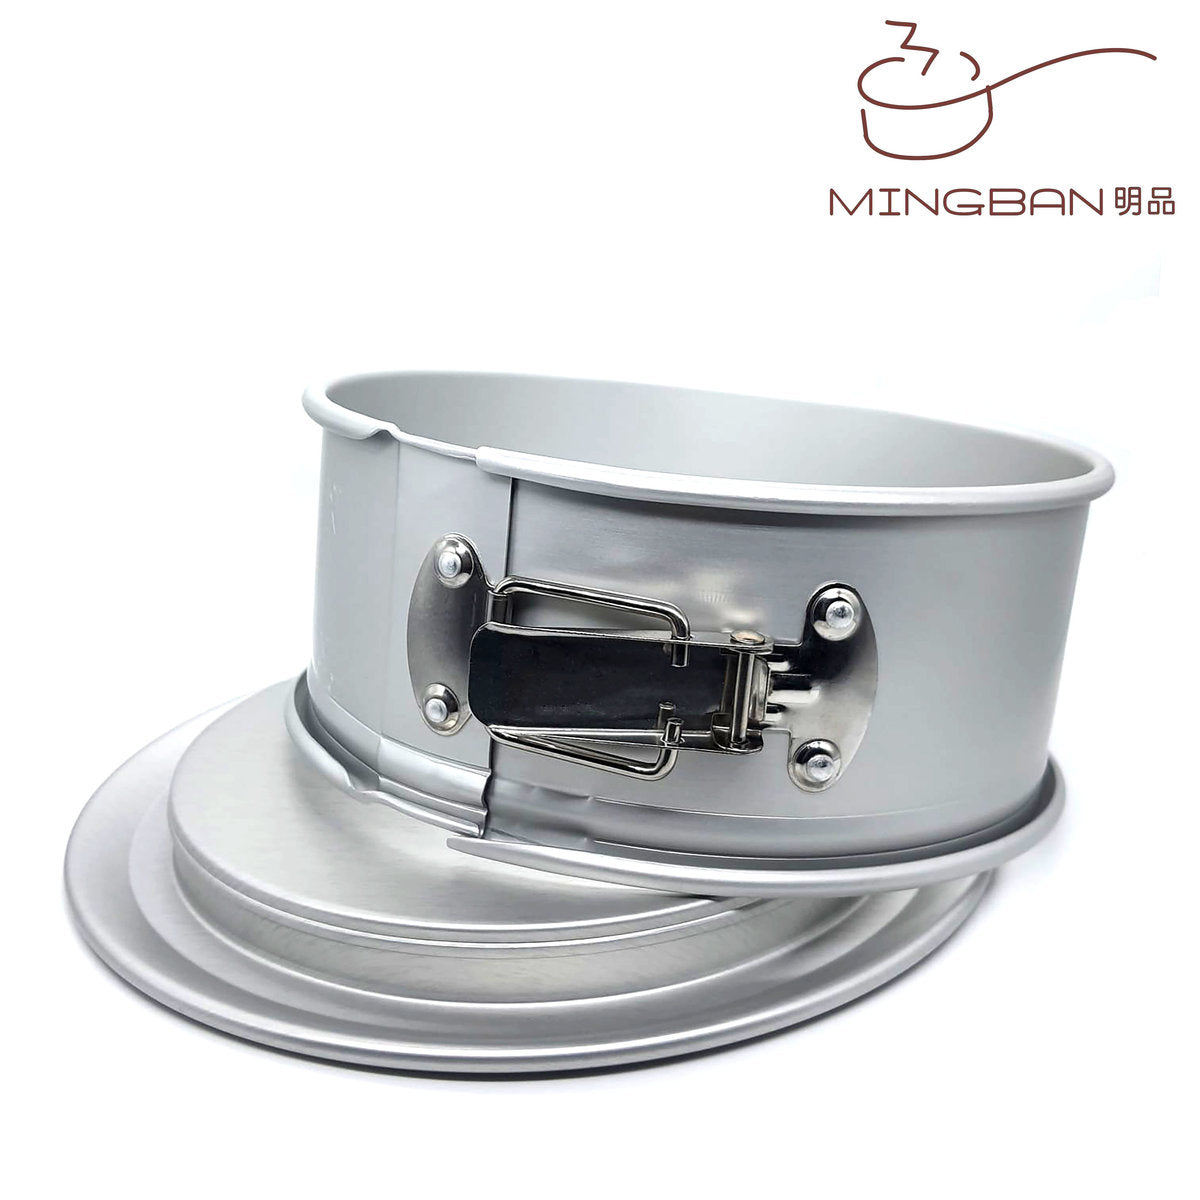 6" Stainless Steel Buckle Round Cake Mold (Removable Bottom Plate / Anodized)